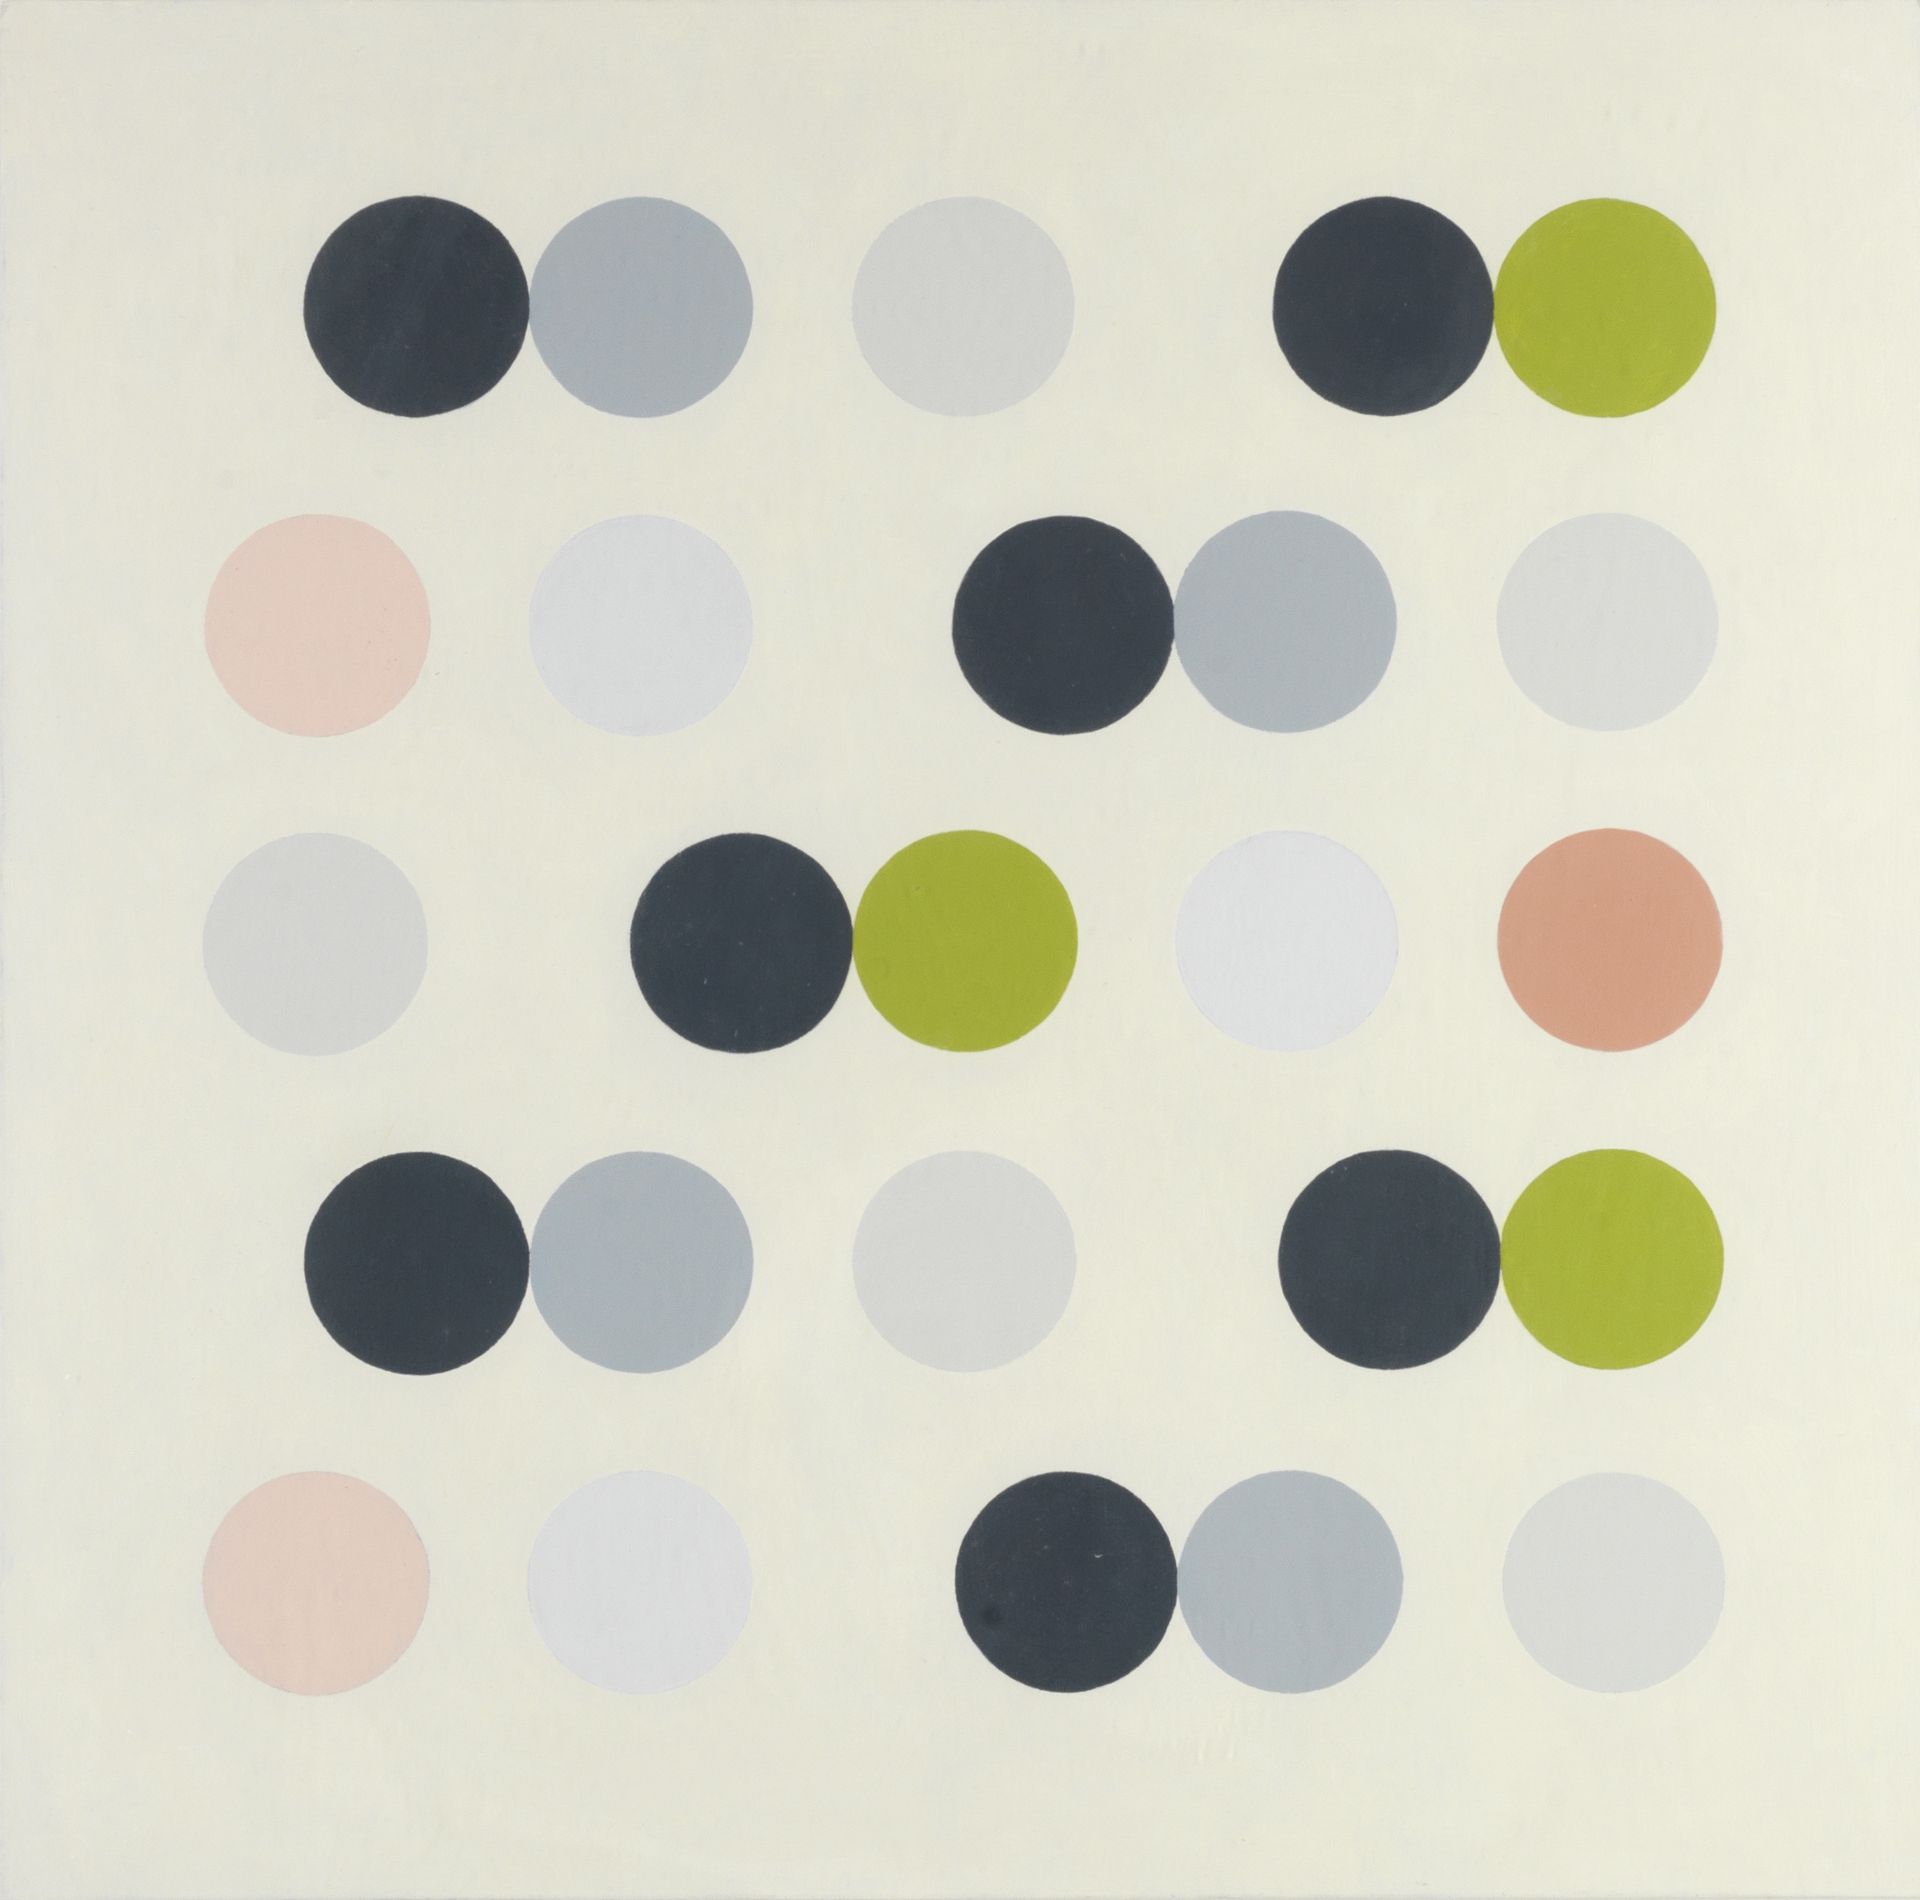 Michael Canney (British, 1923-1999) System with Circles No 3, 1981